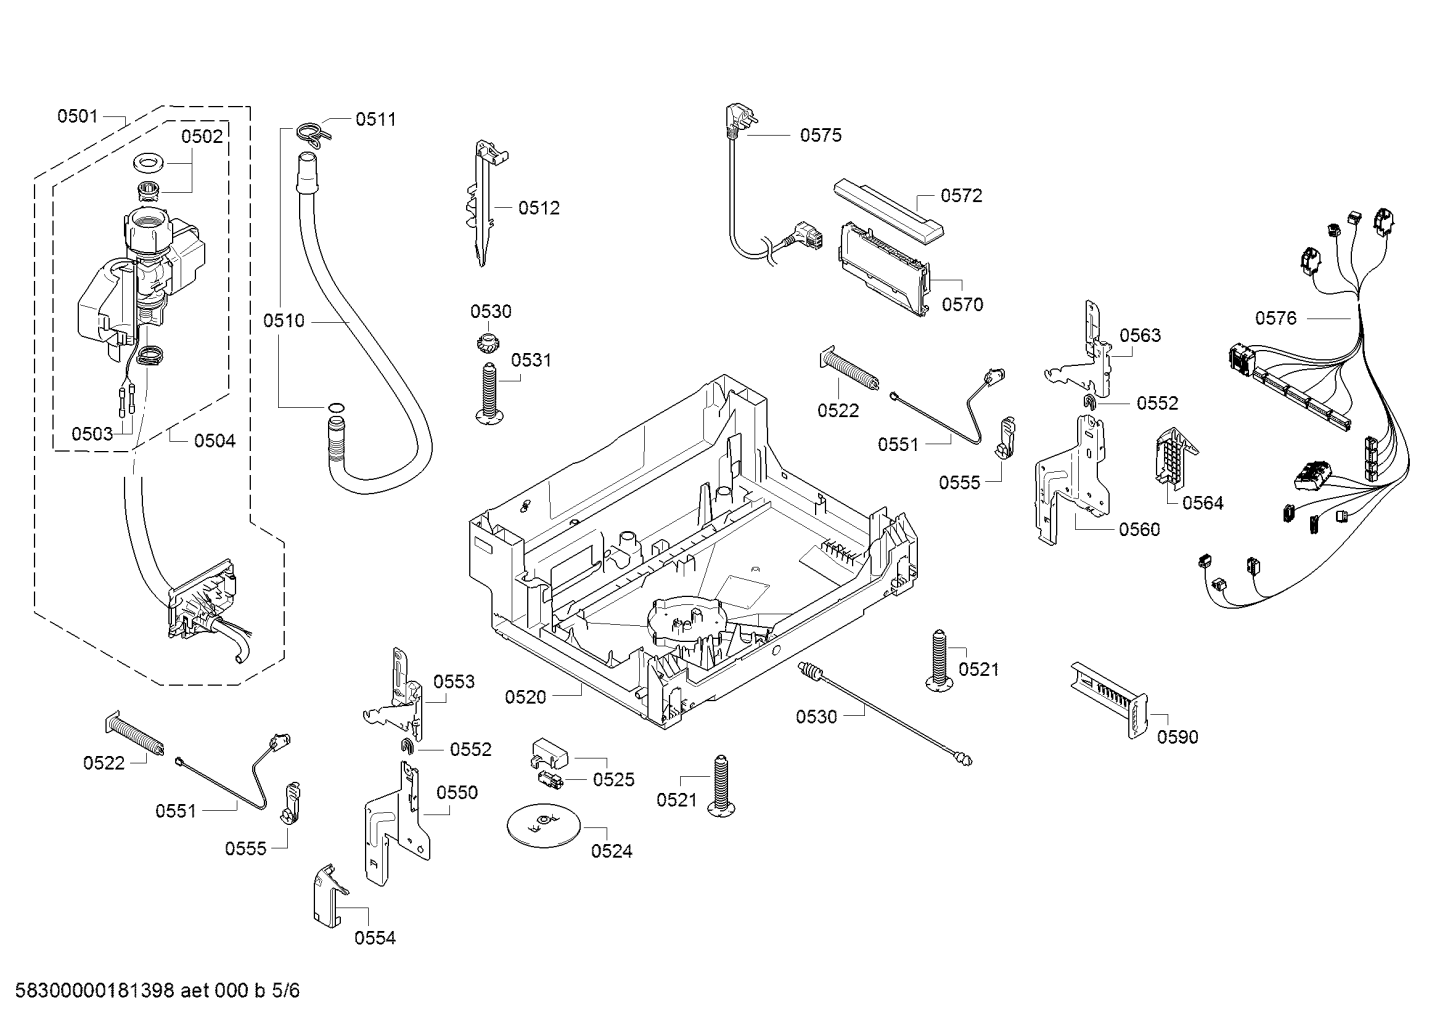 drawing_link_5_device_1768147